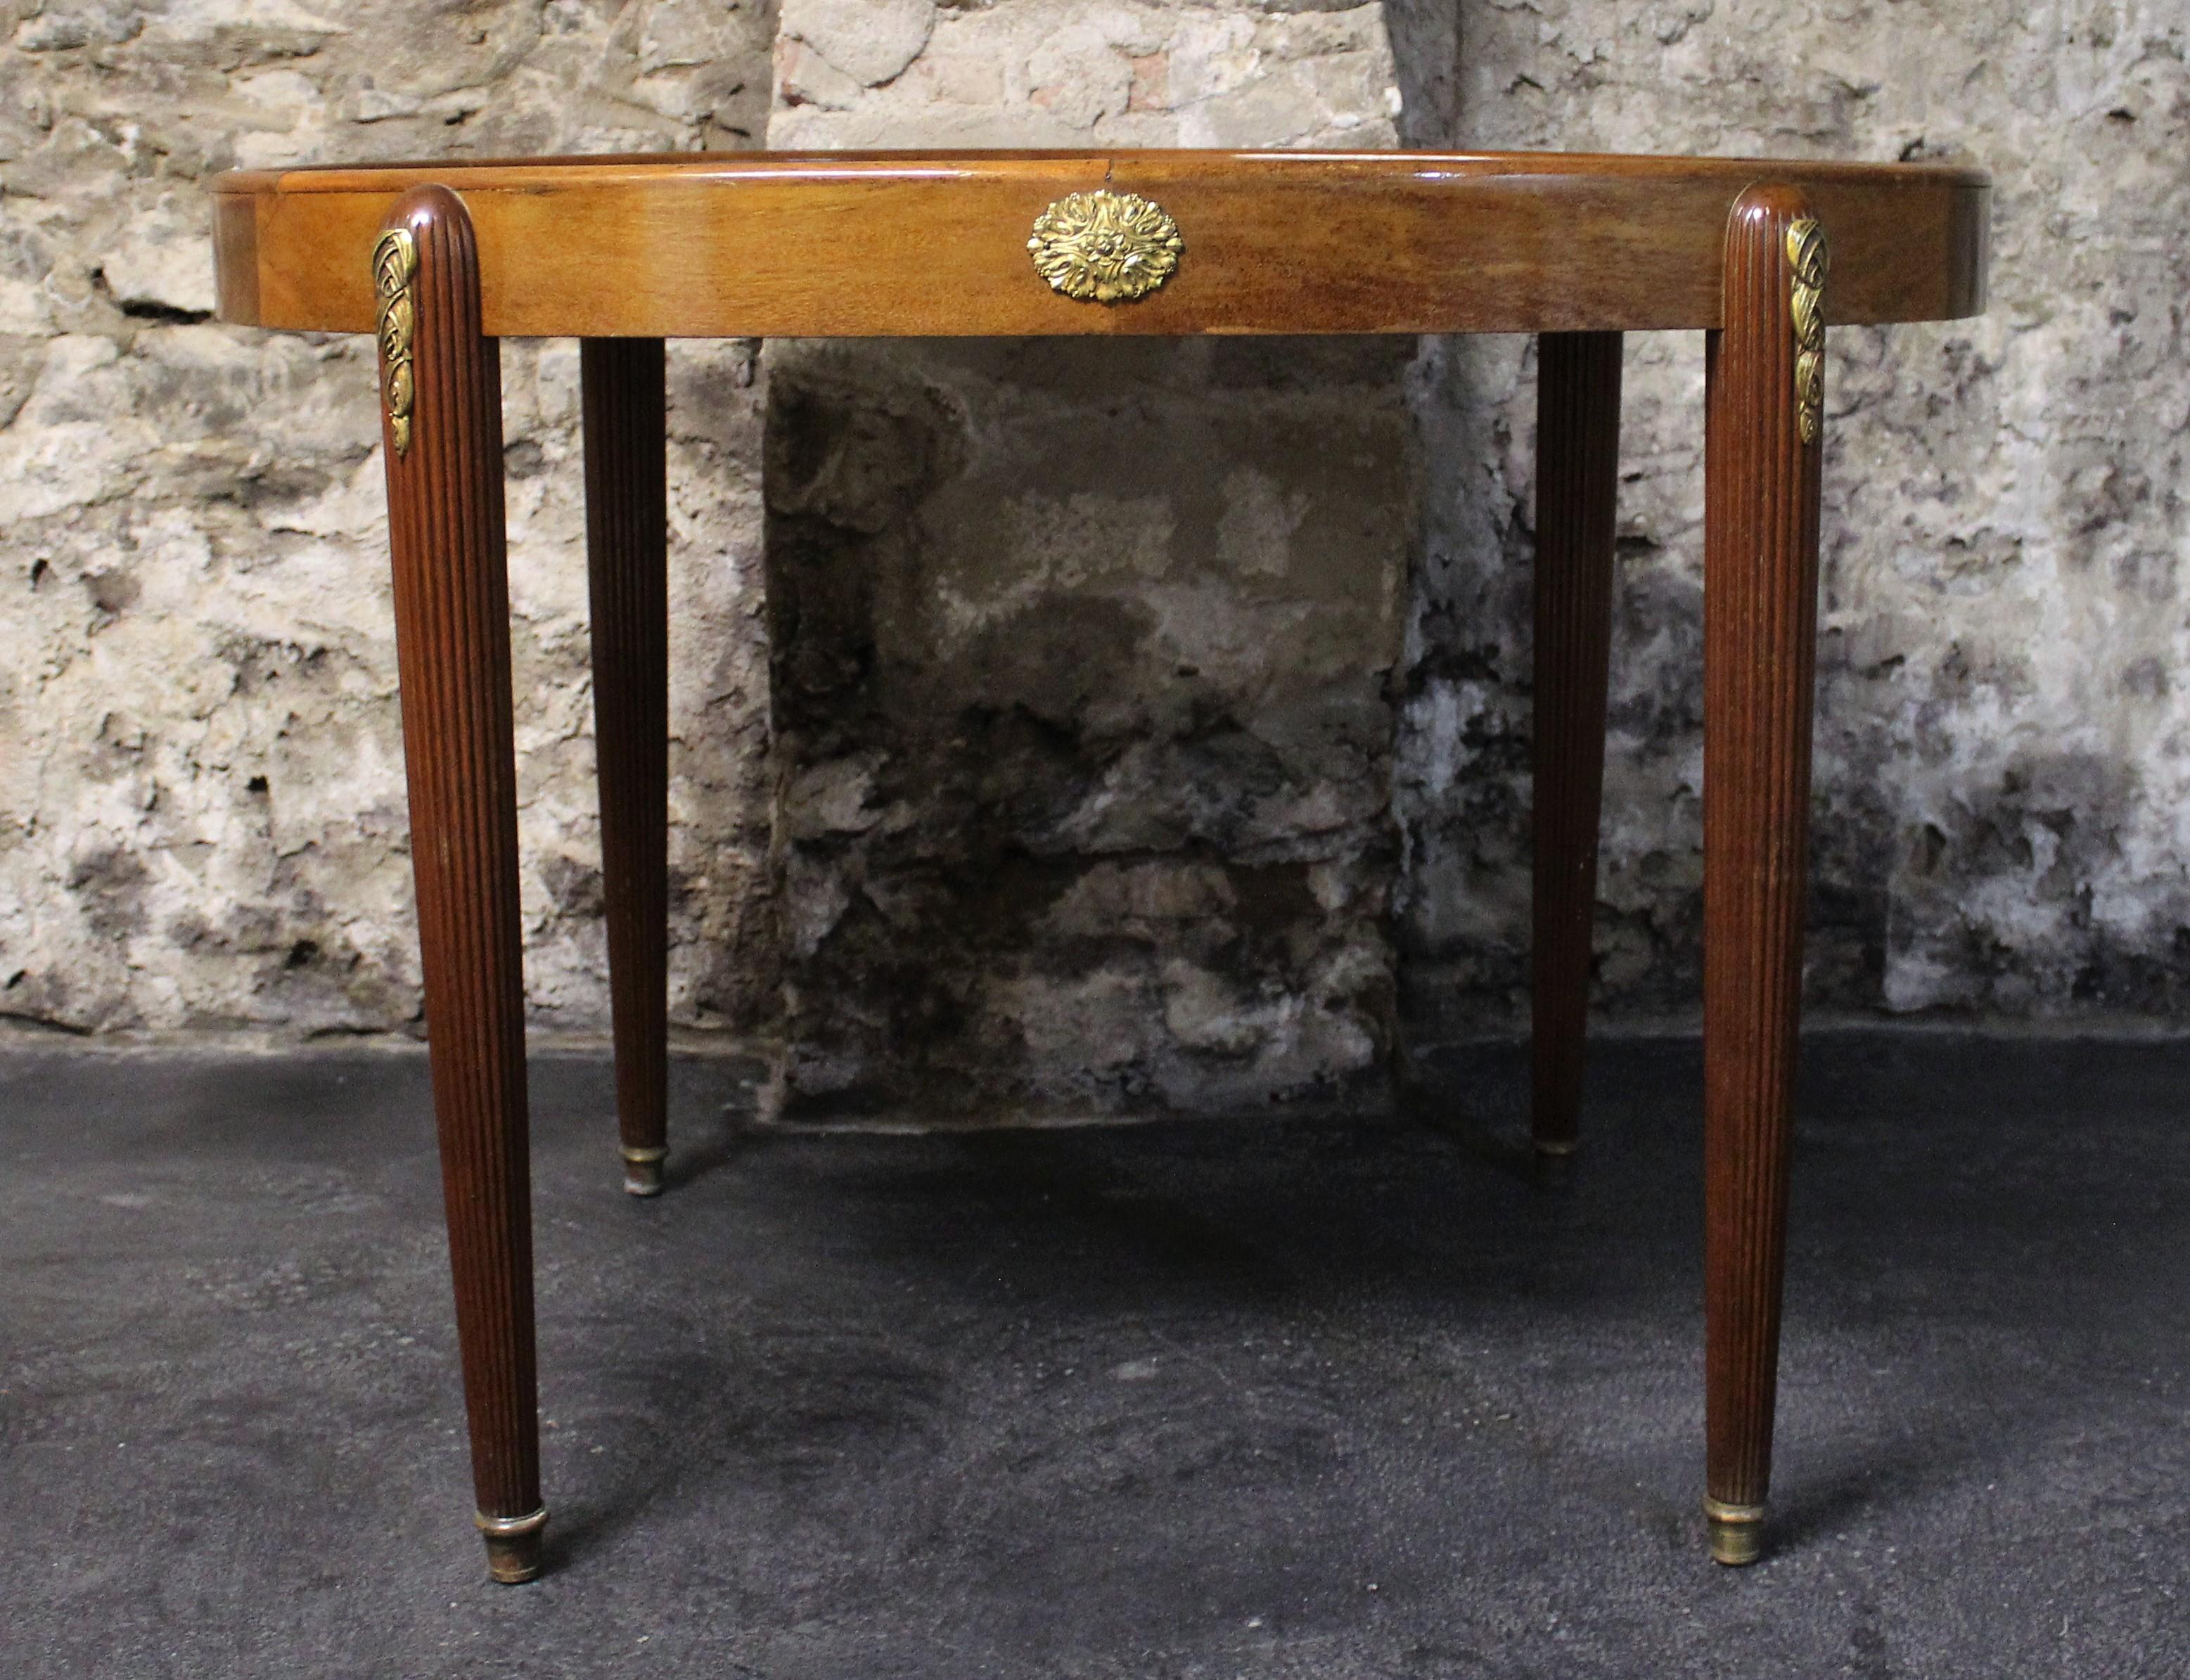 French Art Deco serving or console table with Louis XVI Inspiration.